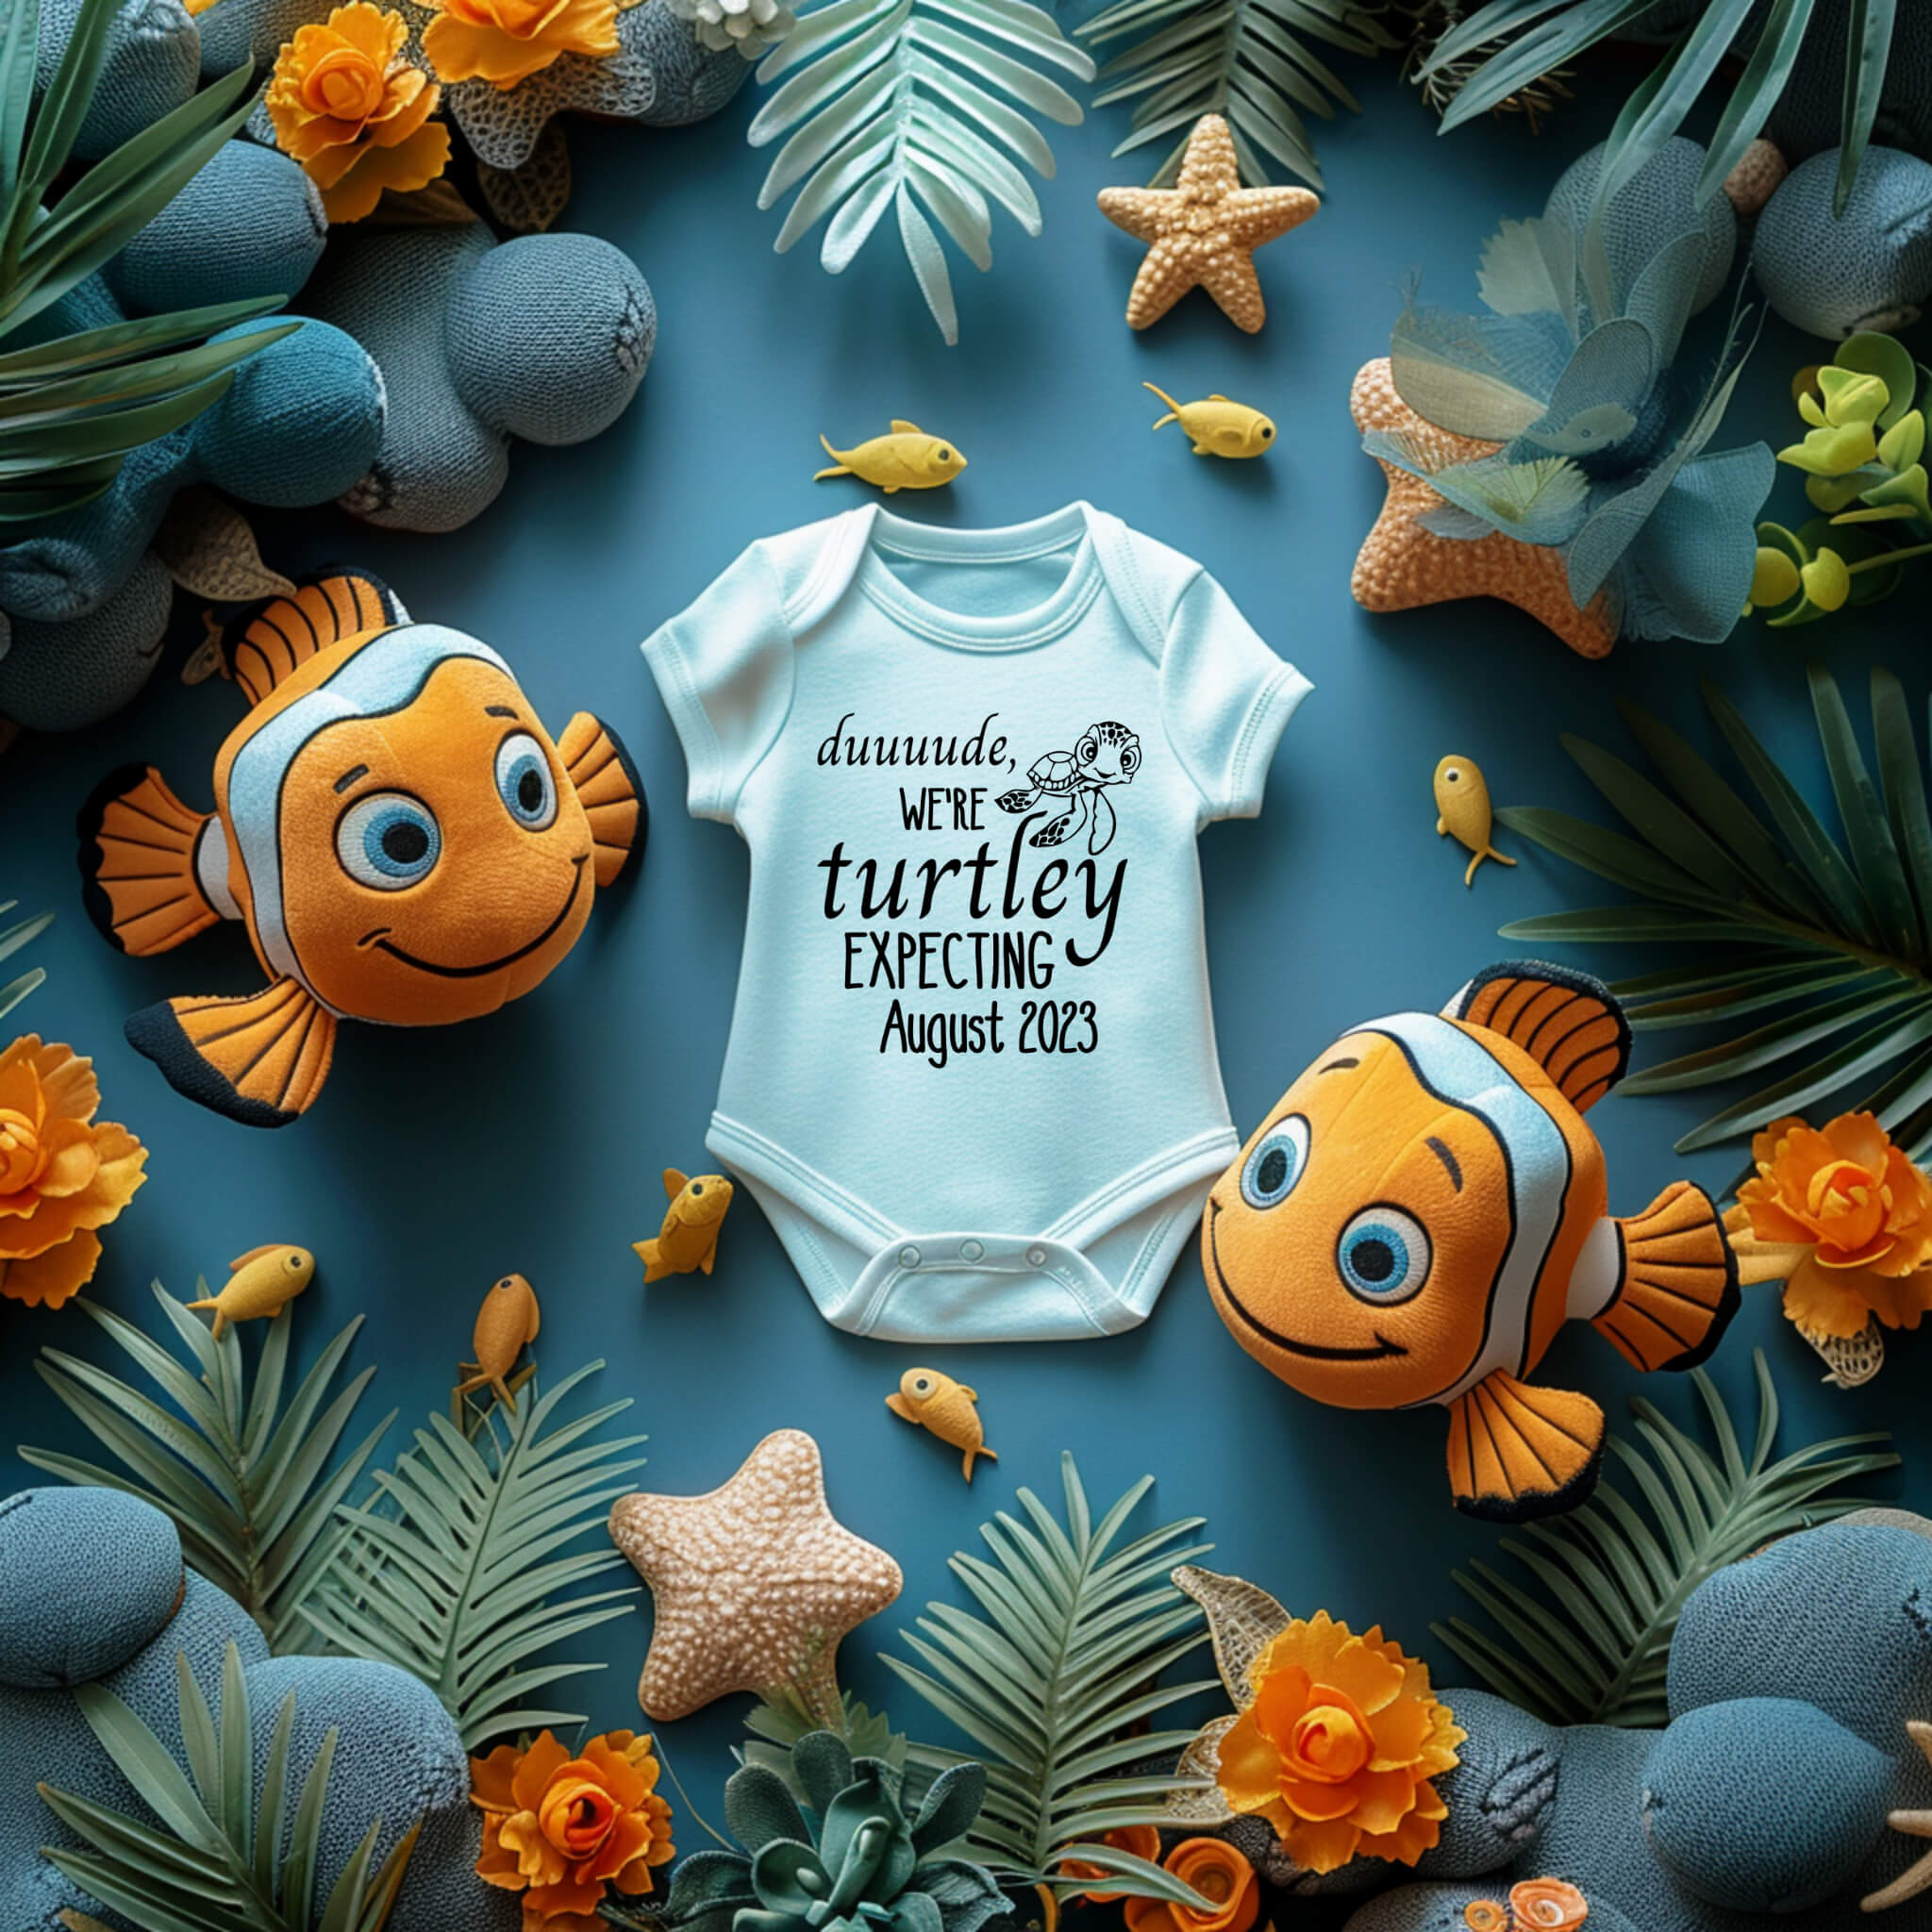 Personalized Pregnancy Announcement, Finding Nemo Themed, Dude We’re Turtley Expecting, Customized Baby Announcement Onesie, Social Media Announcement, Gift Box Baby Announcement